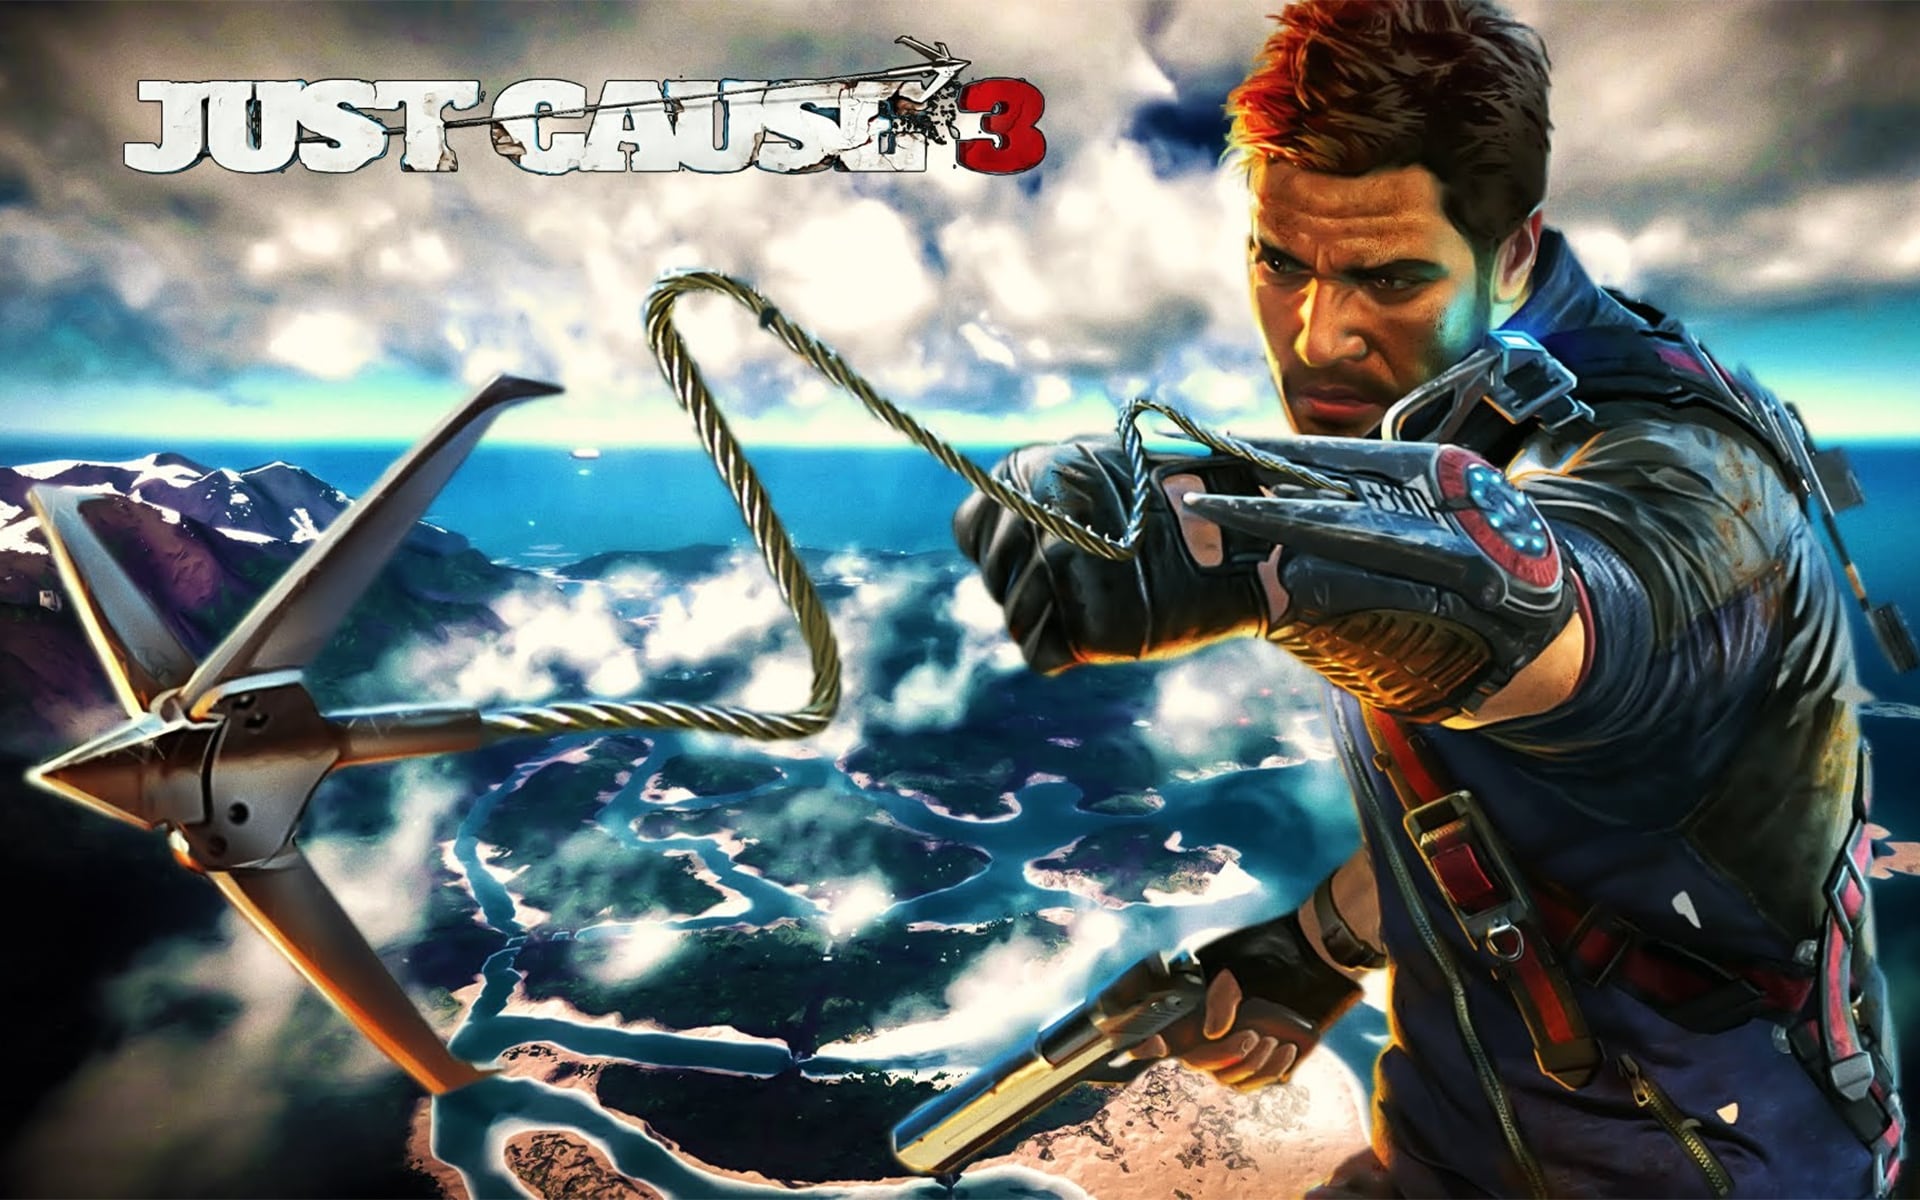 2 top game. Рико Родригес just cause 1. Игра just cause 3. Just cause 3 экшен. Just cause 6.